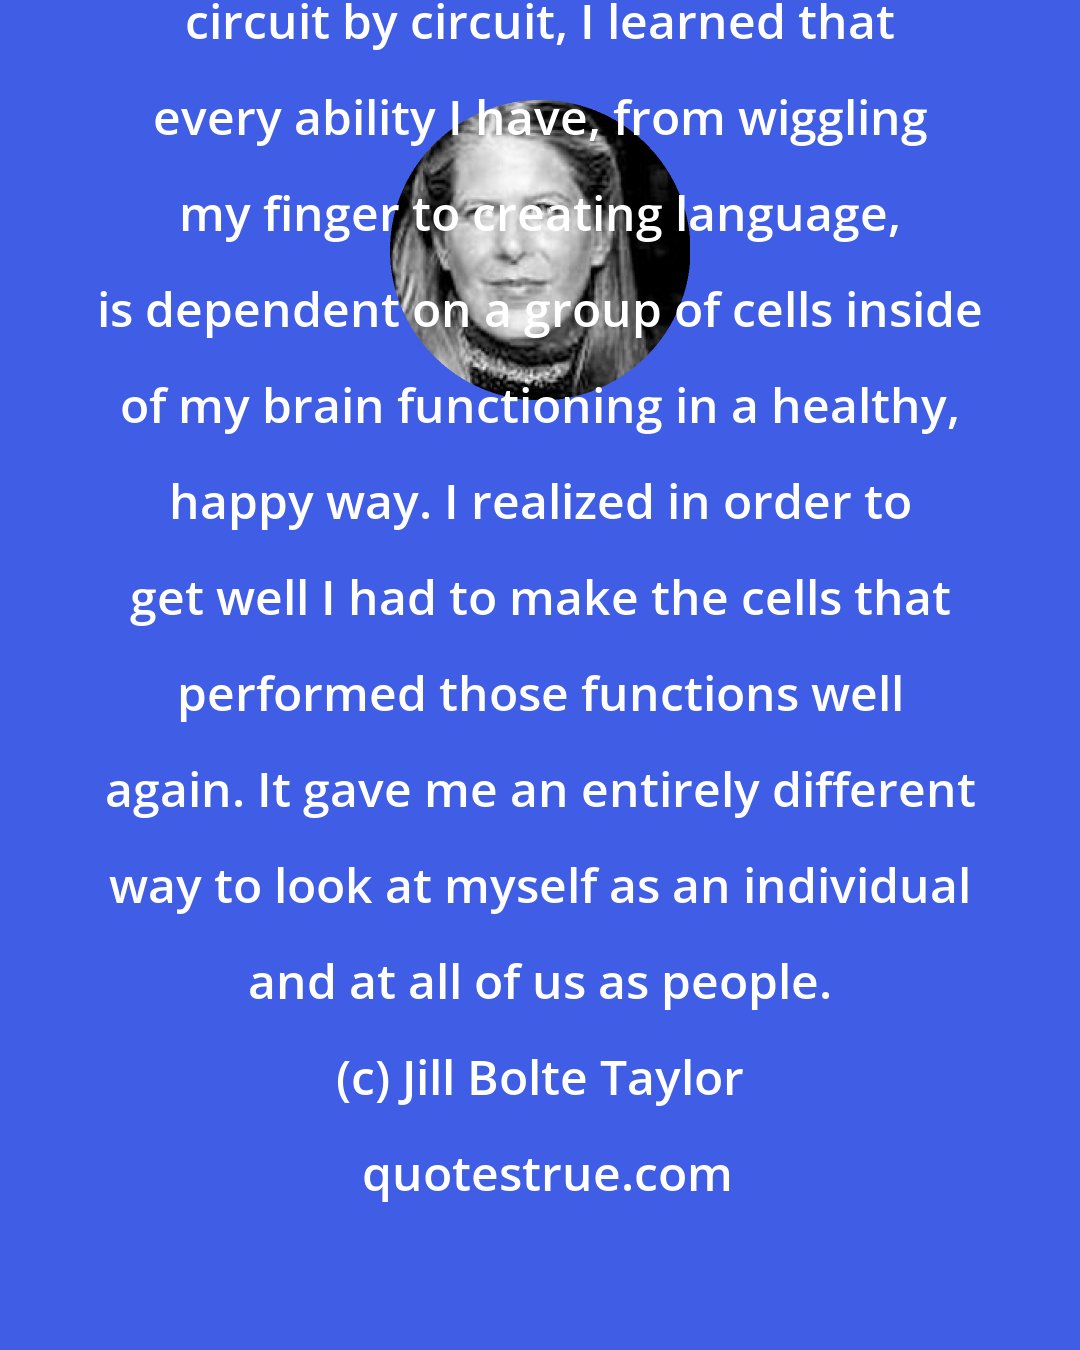 Jill Bolte Taylor: From watching my own mind deteriorate circuit by circuit, I learned that every ability I have, from wiggling my finger to creating language, is dependent on a group of cells inside of my brain functioning in a healthy, happy way. I realized in order to get well I had to make the cells that performed those functions well again. It gave me an entirely different way to look at myself as an individual and at all of us as people.